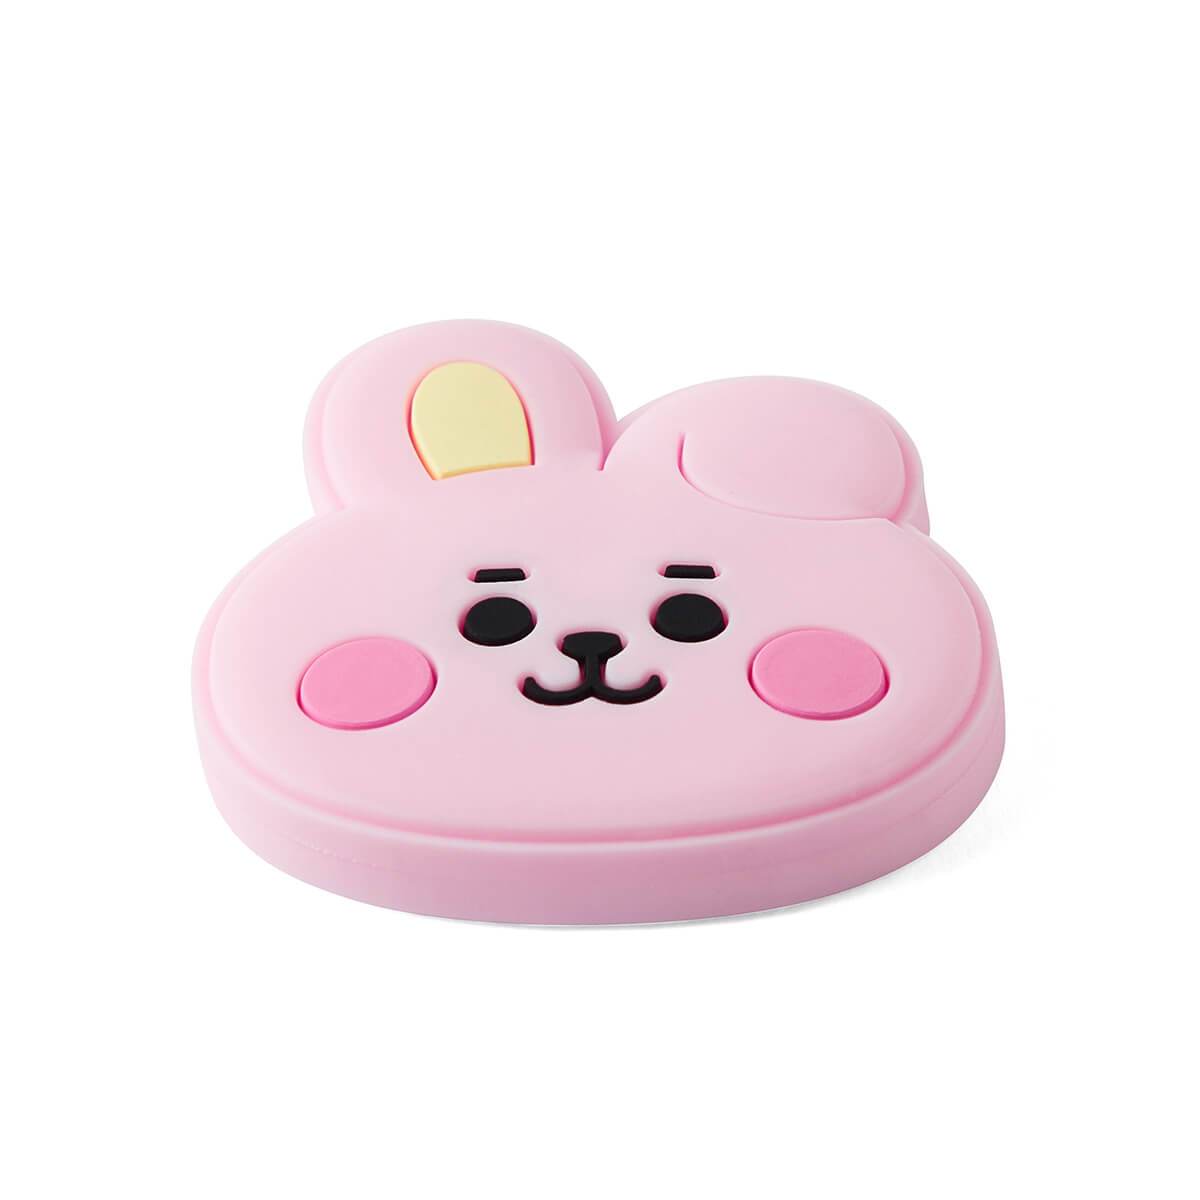 BT21 COOKY Baby Silicone Magnet